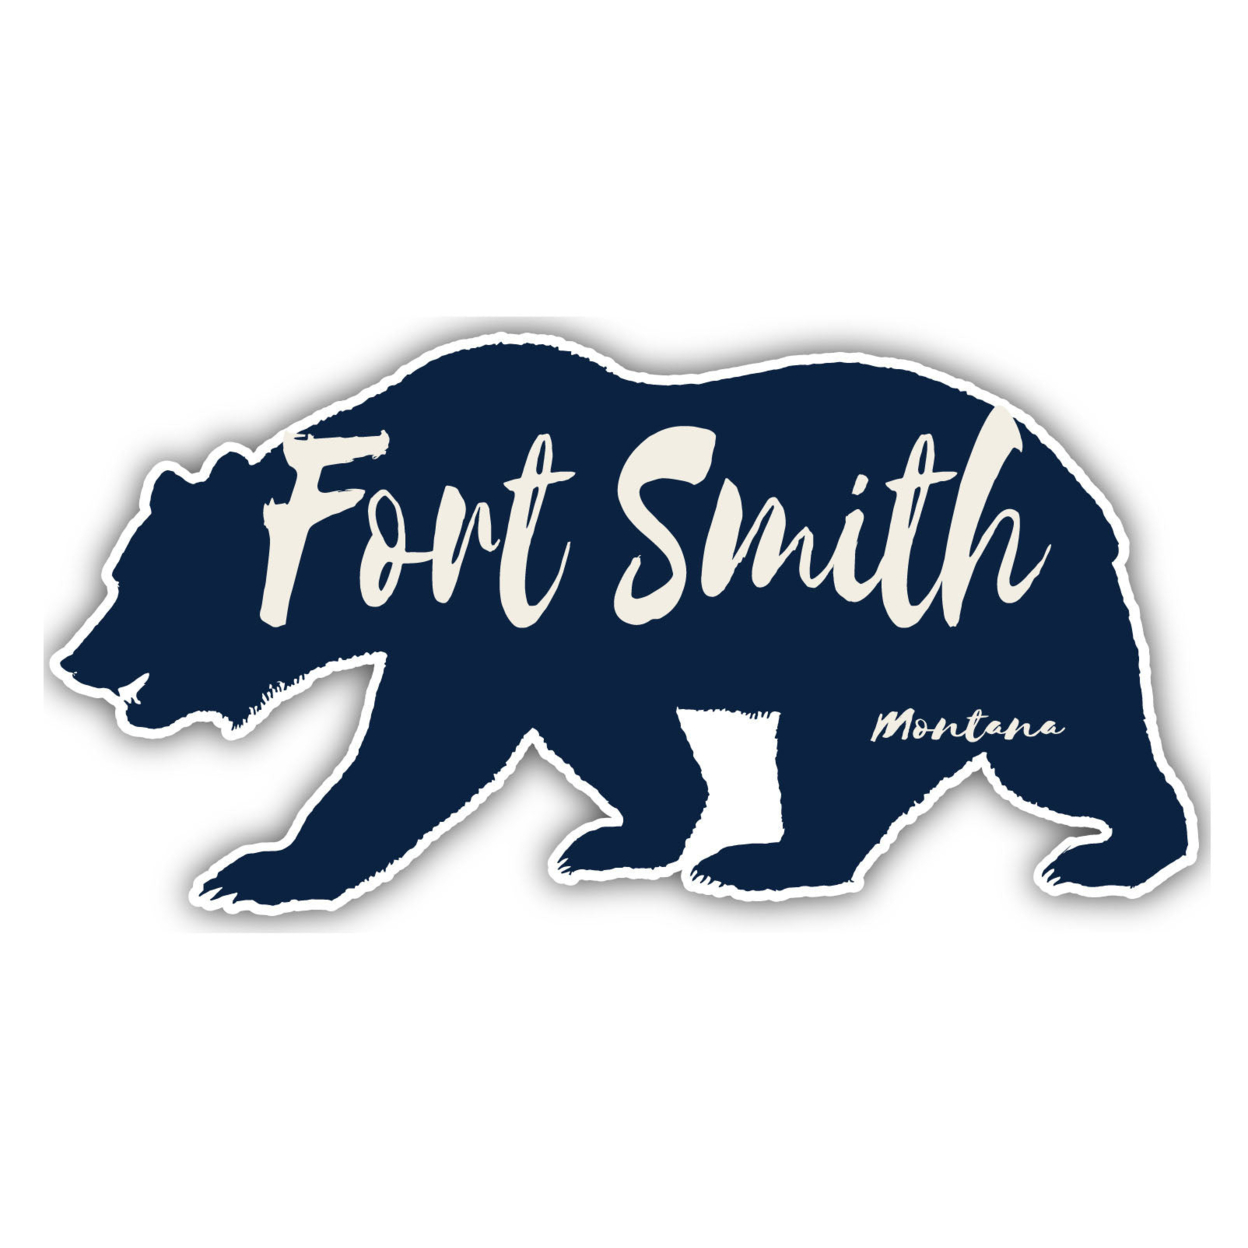 Fort Smith Montana Souvenir Decorative Stickers (Choose Theme And Size) - 4-Pack, 10-Inch, Tent